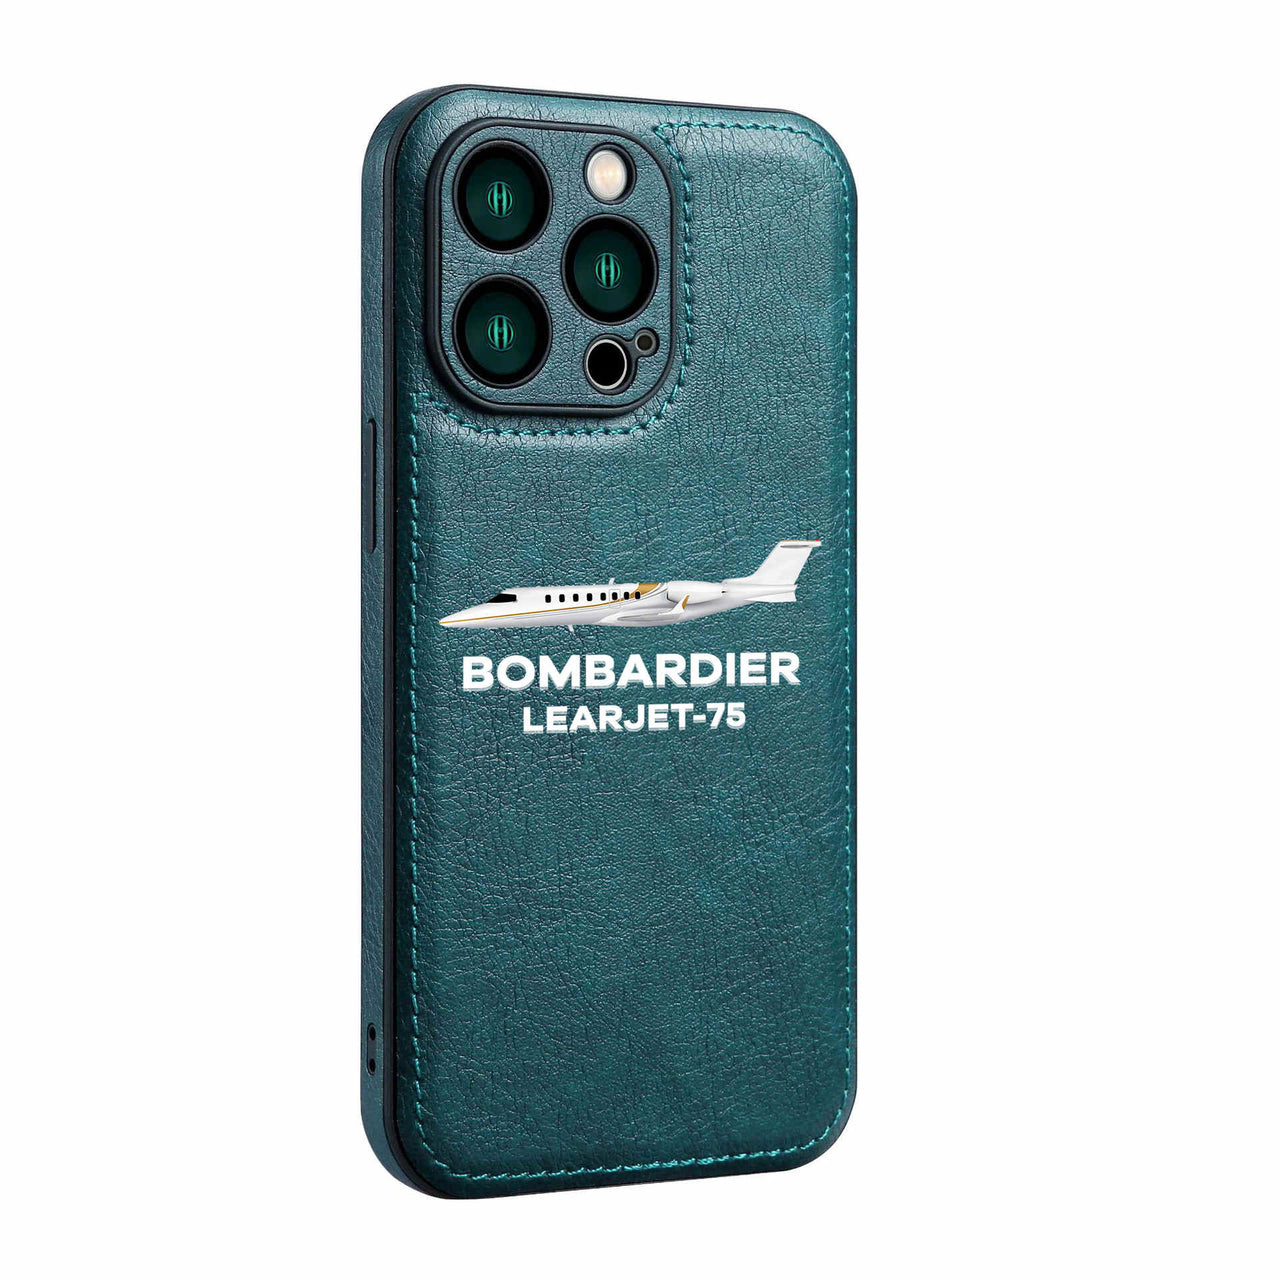 The Bombardier Learjet 75 Designed Leather iPhone Cases